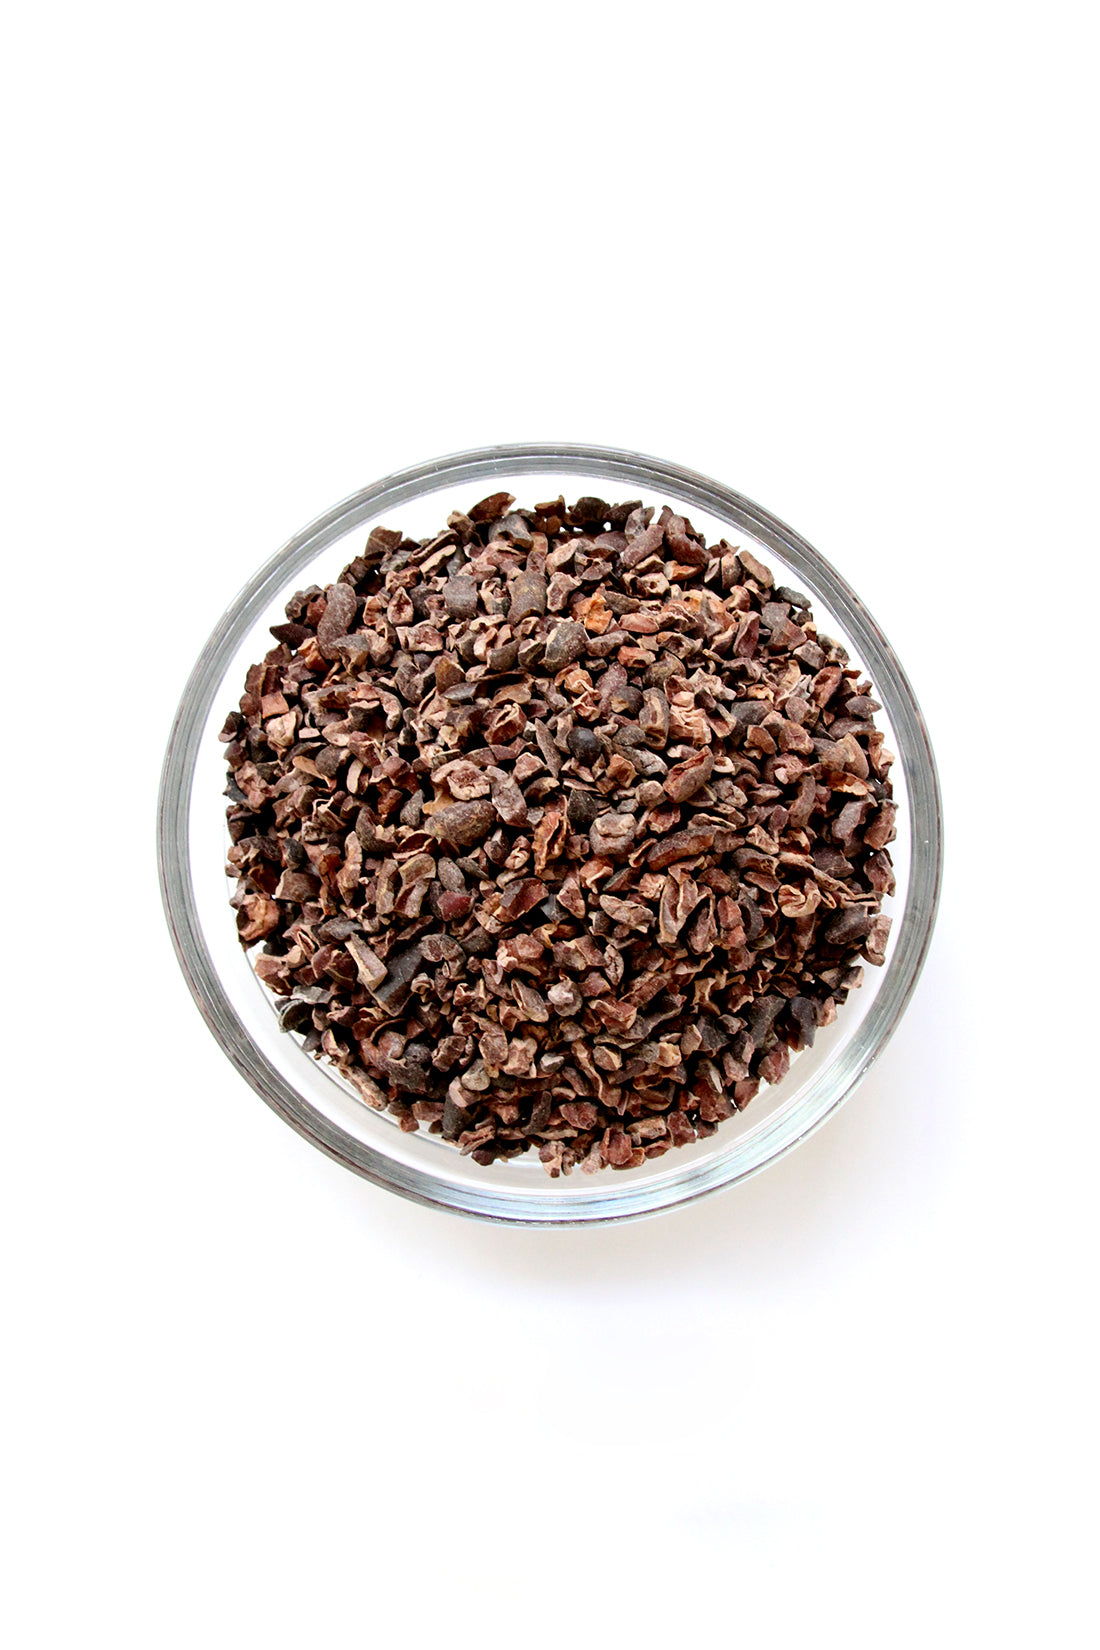 Image from above of a bowl of cacao nibs used for Miss Jones Baking Co Coffee Break Shake